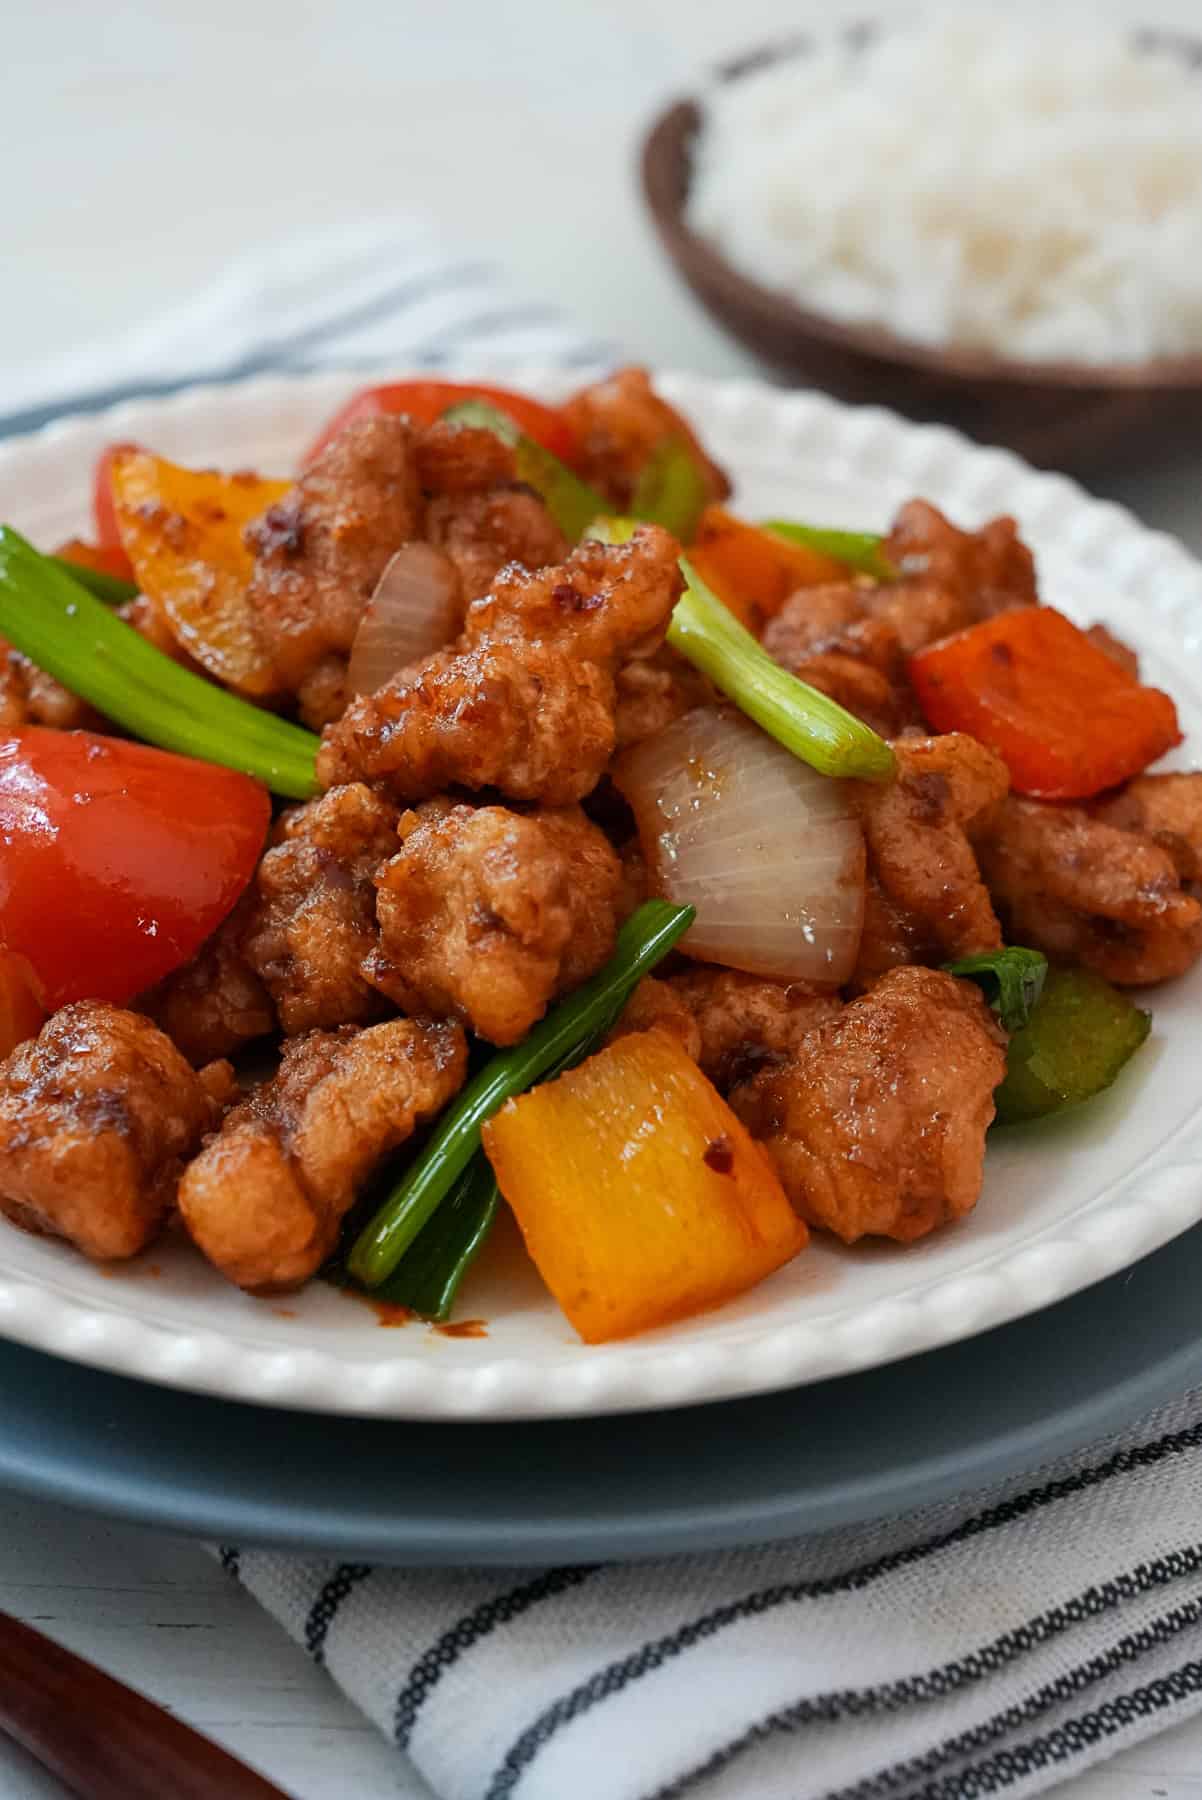 Chicken with Roasted Chili Paste